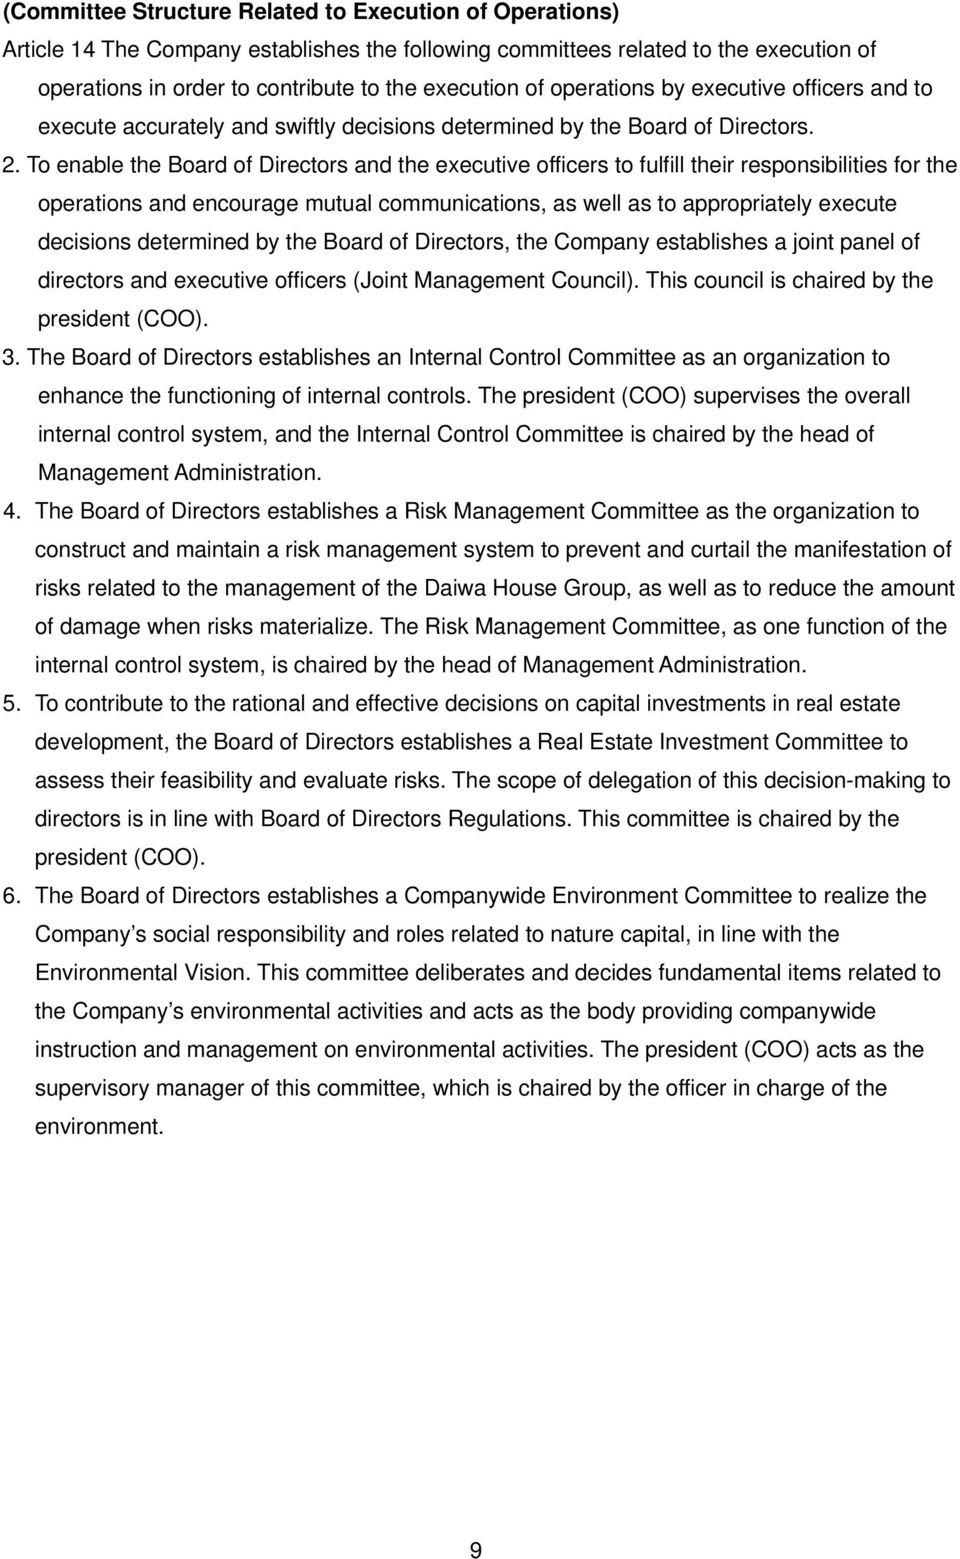 To enable the Board of Directors and the executive officers to fulfill their responsibilities for the operations and encourage mutual communications, as well as to appropriately execute decisions